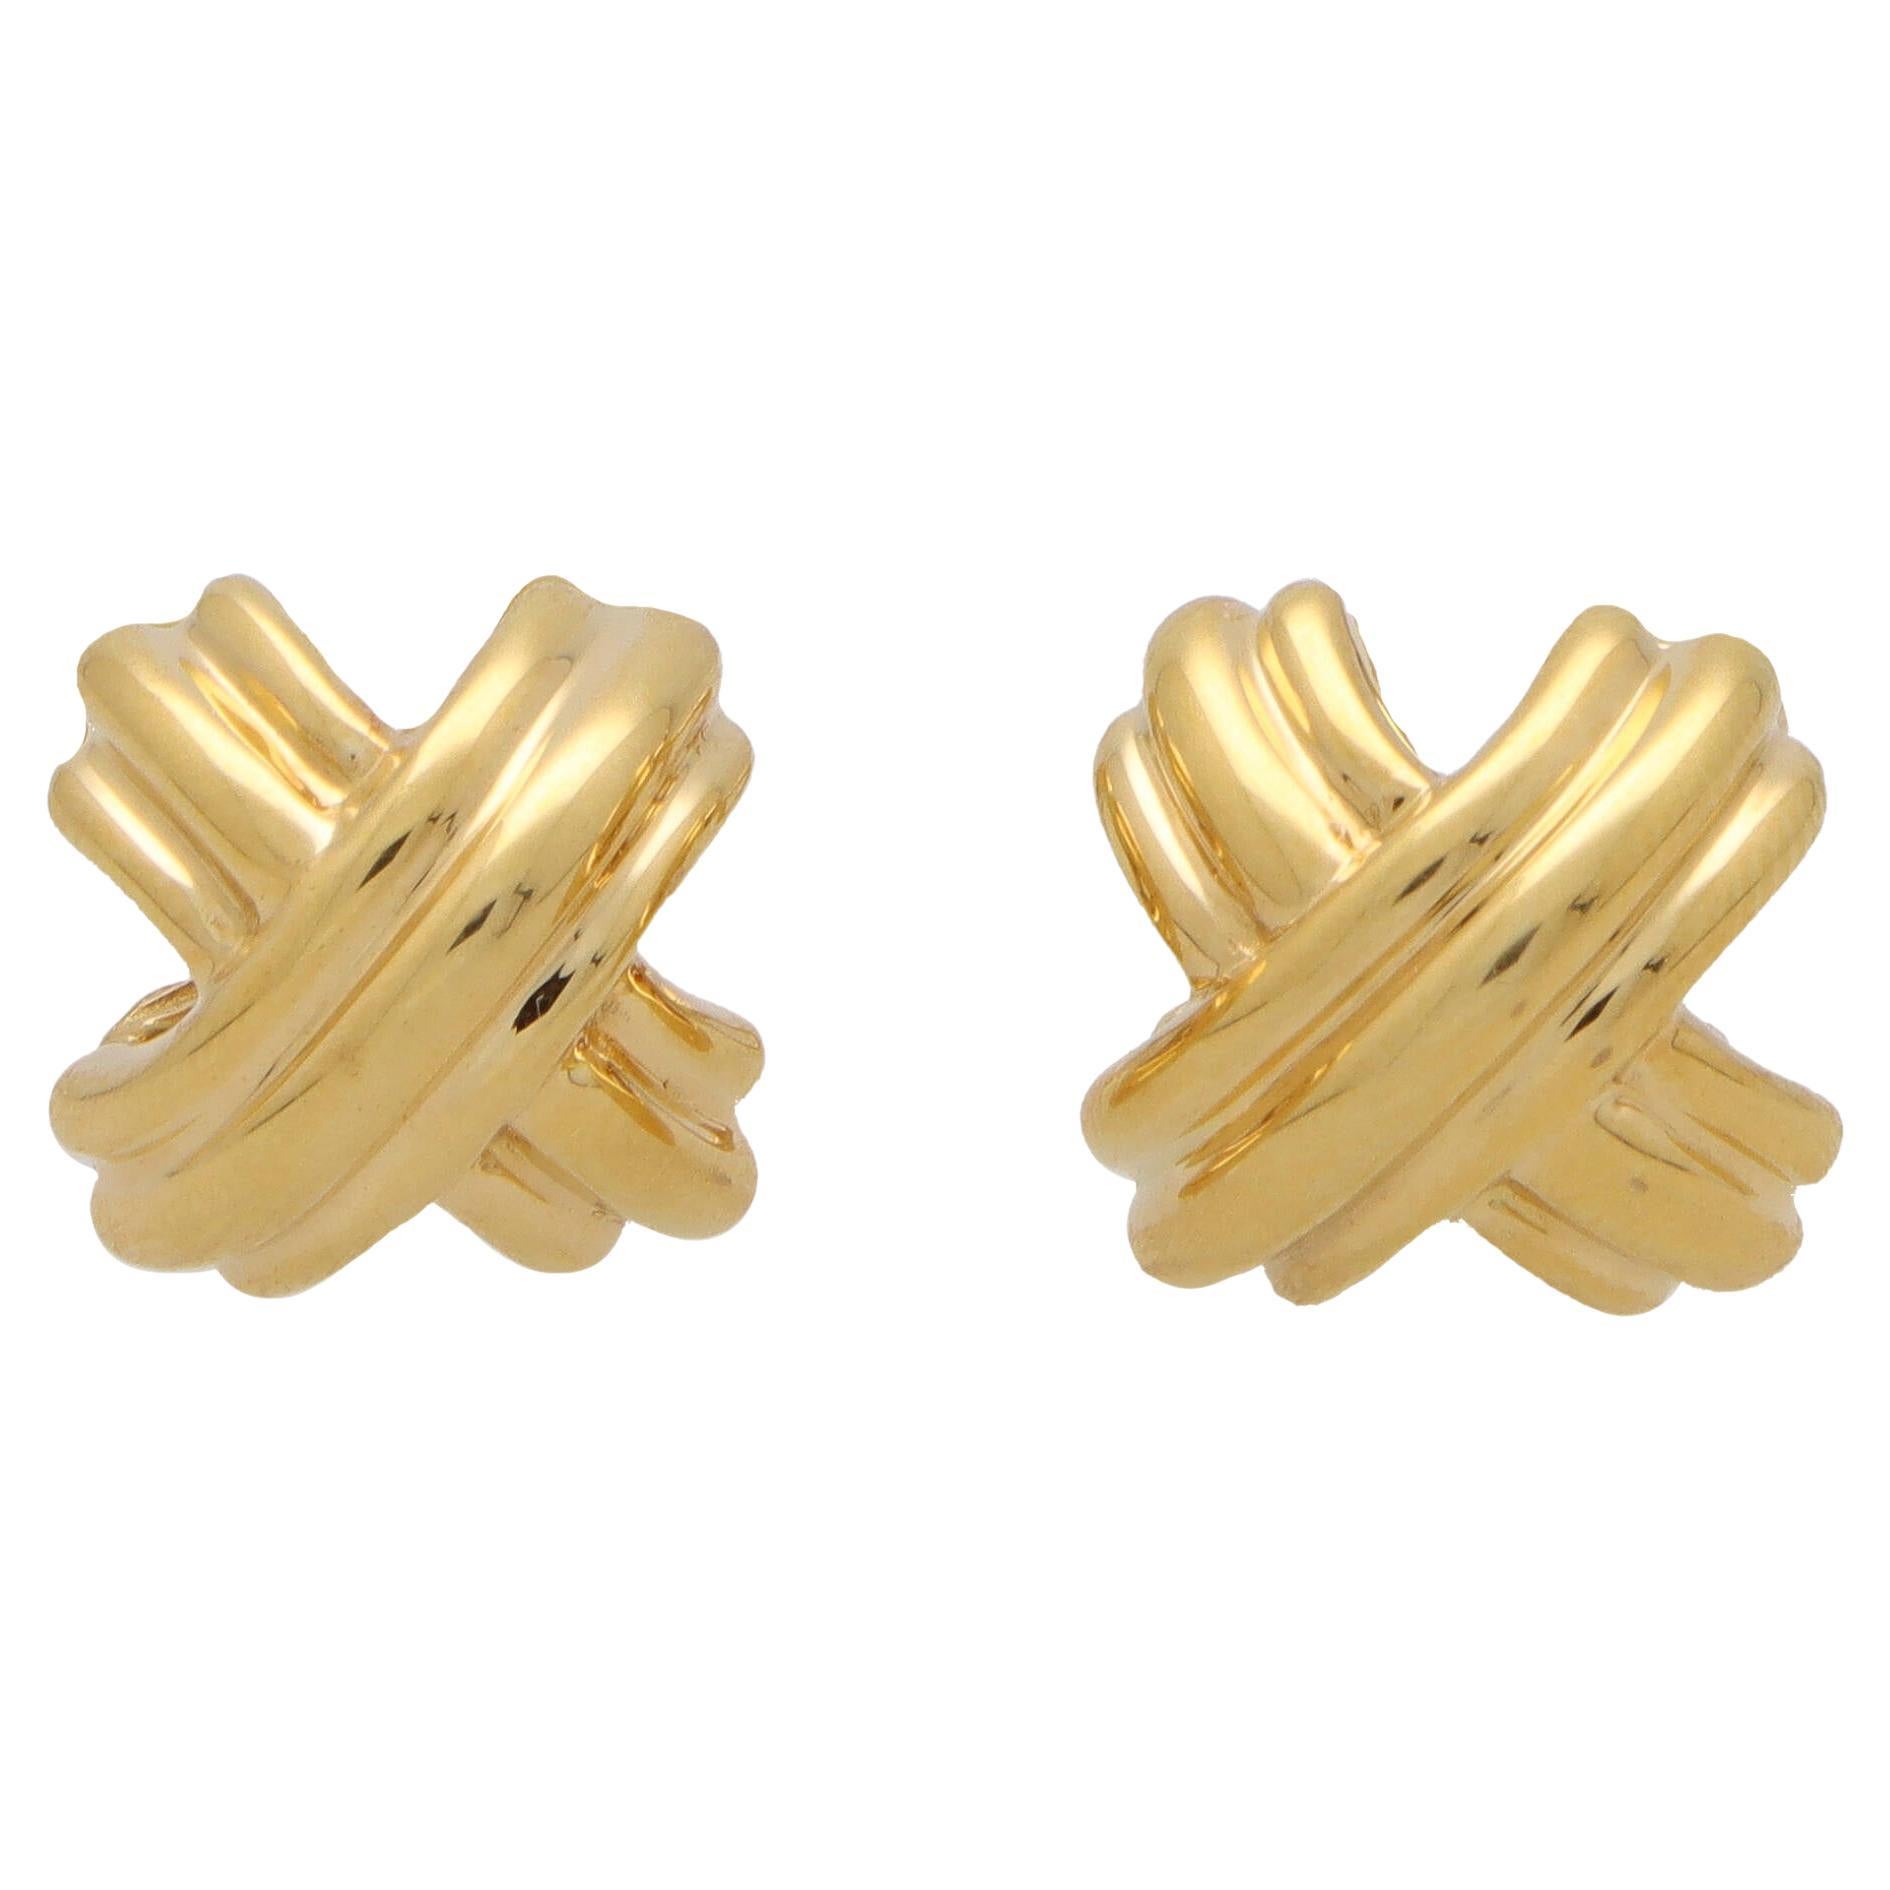  Vintage Tiffany & Co. Signature X Cross Earrings in 18k Yellow Gold